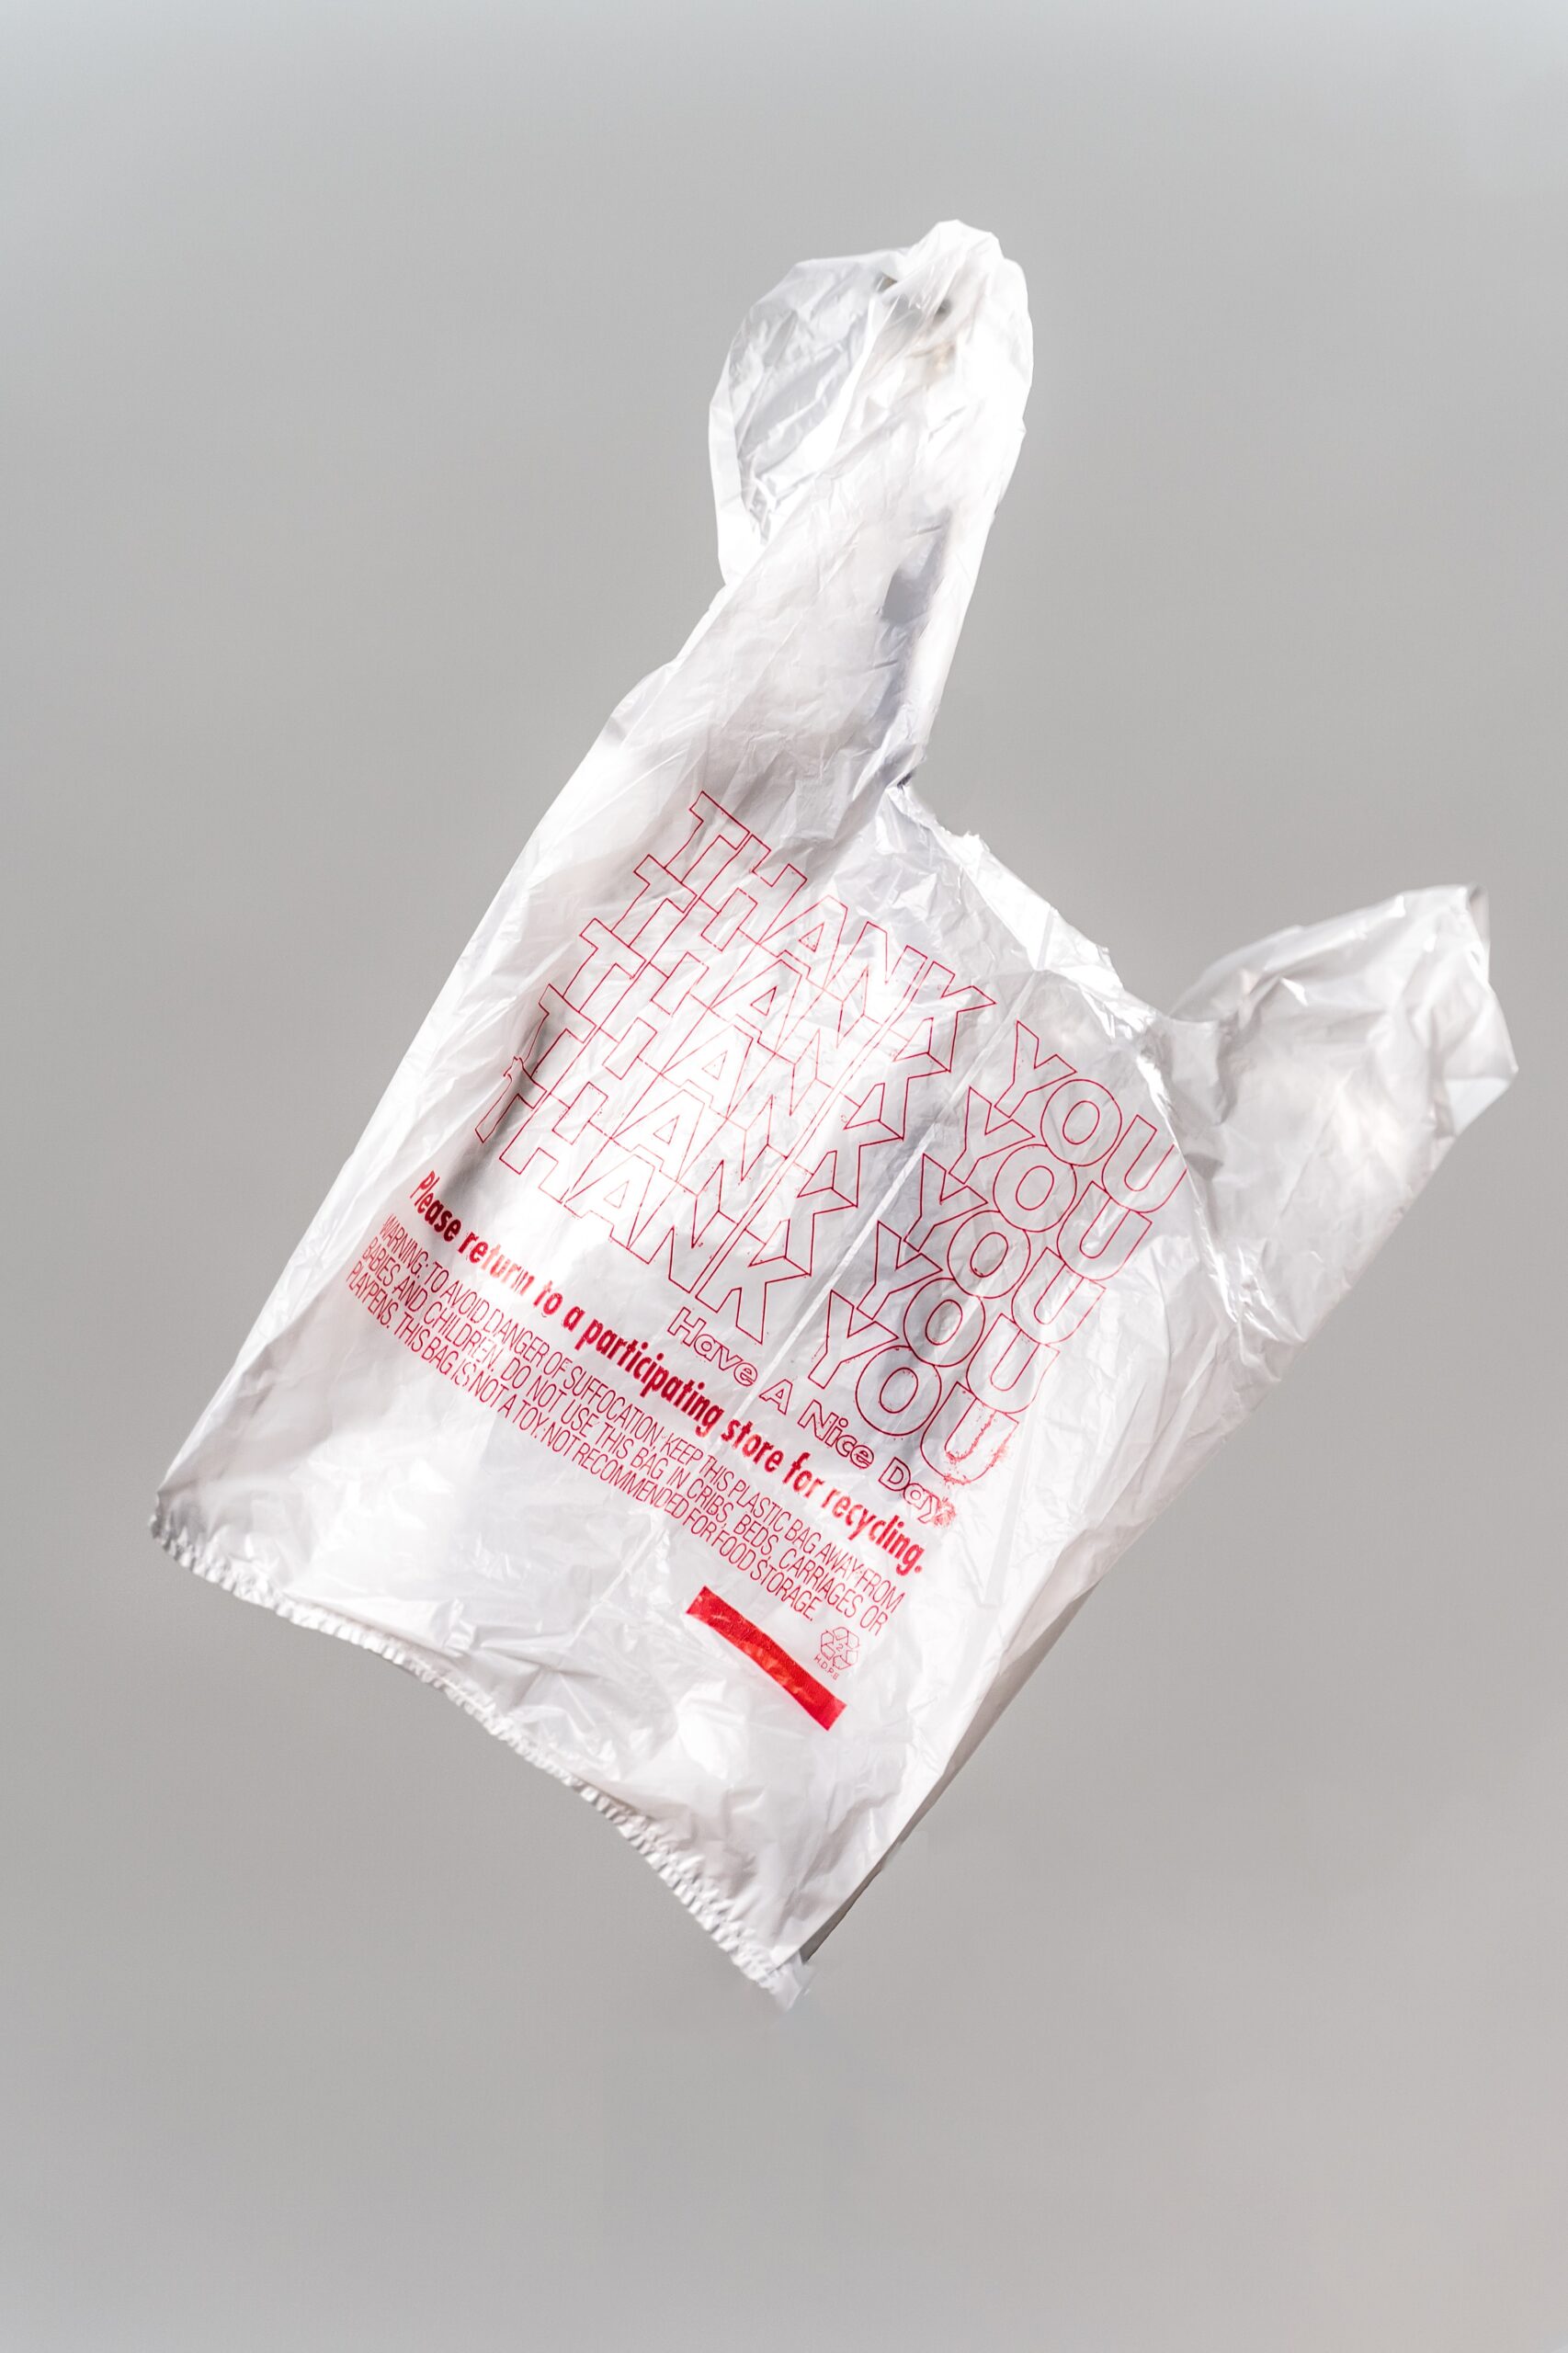 A plastic grocery bag reading "Thank you. Have a nice day."